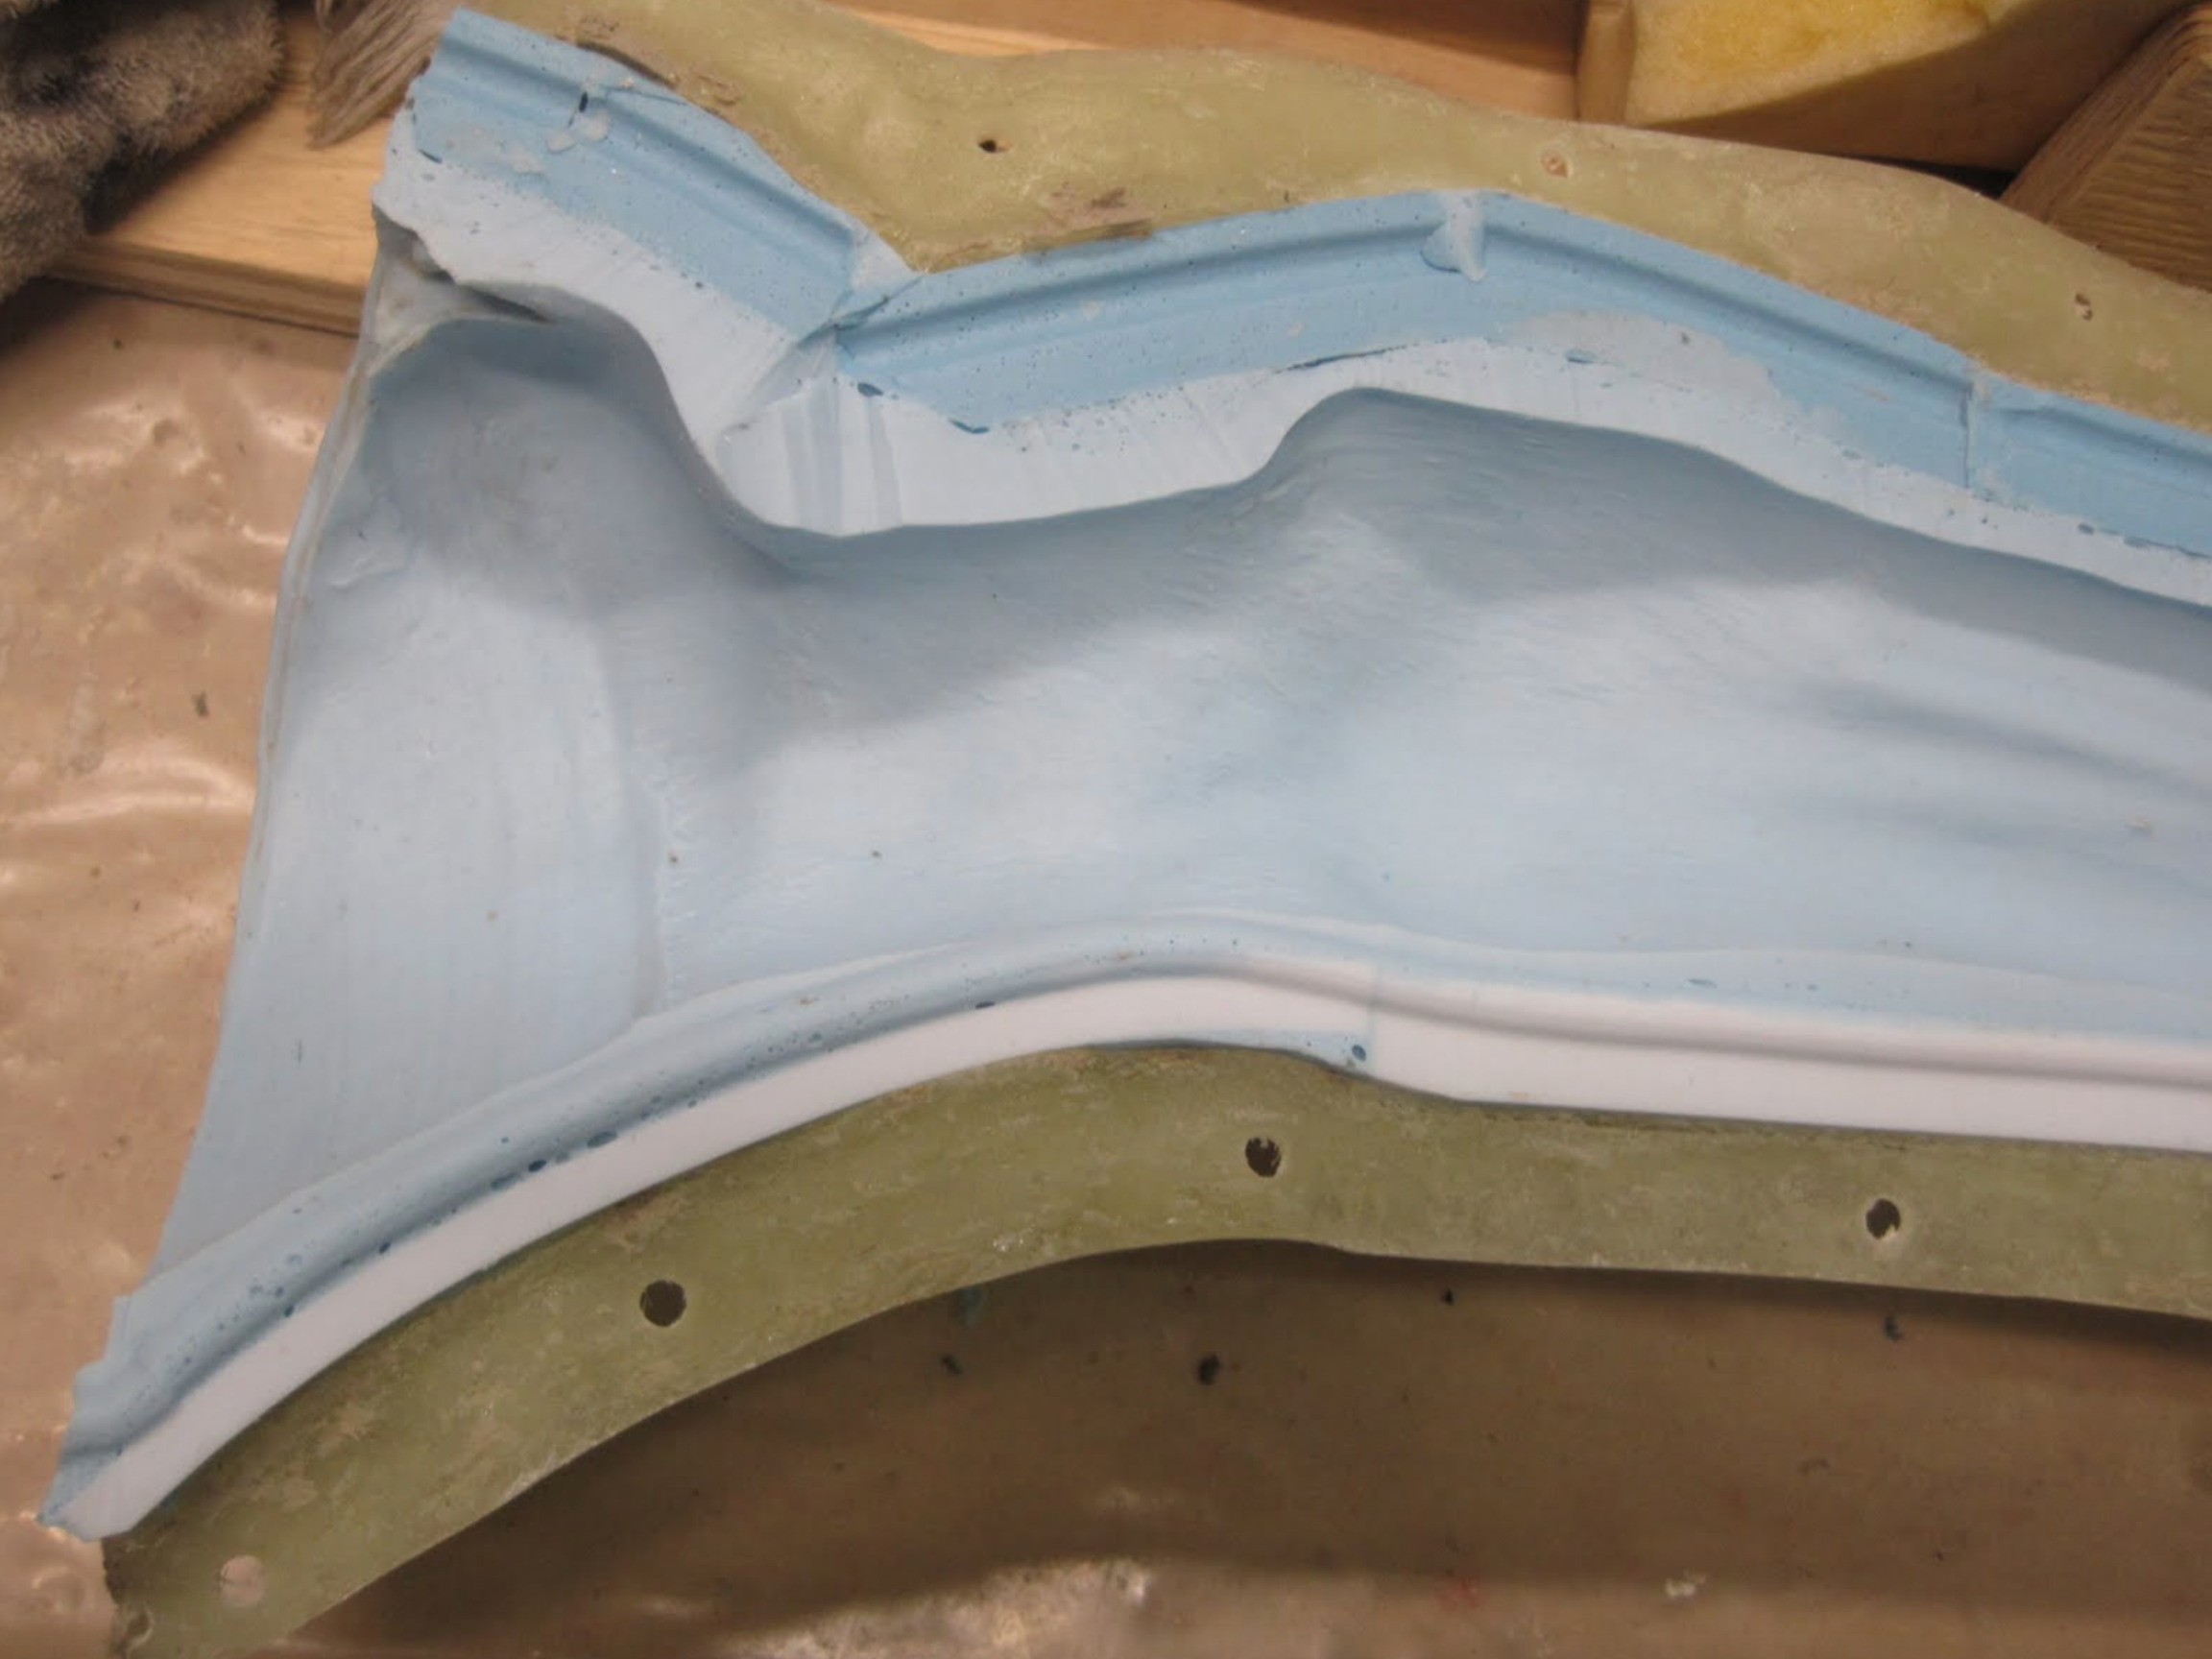  This photo shows the interior of the finished mold, along with the fiberglass jacket. 